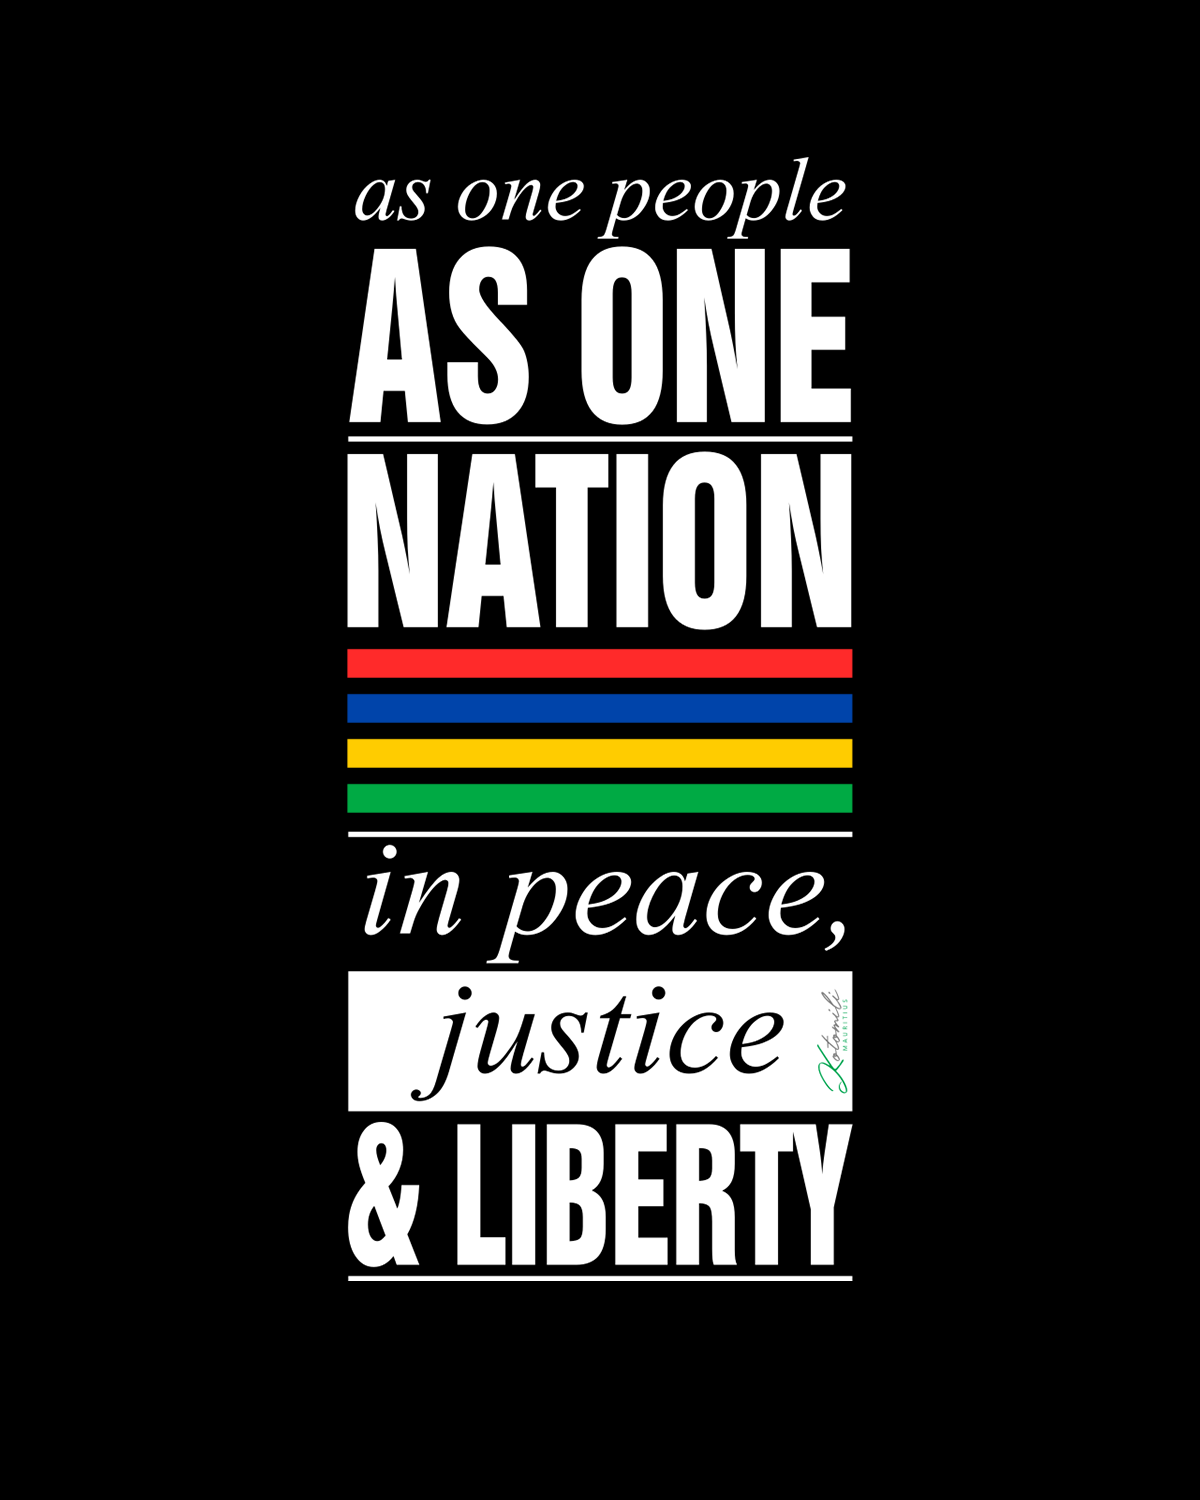 As one nation Mauritius